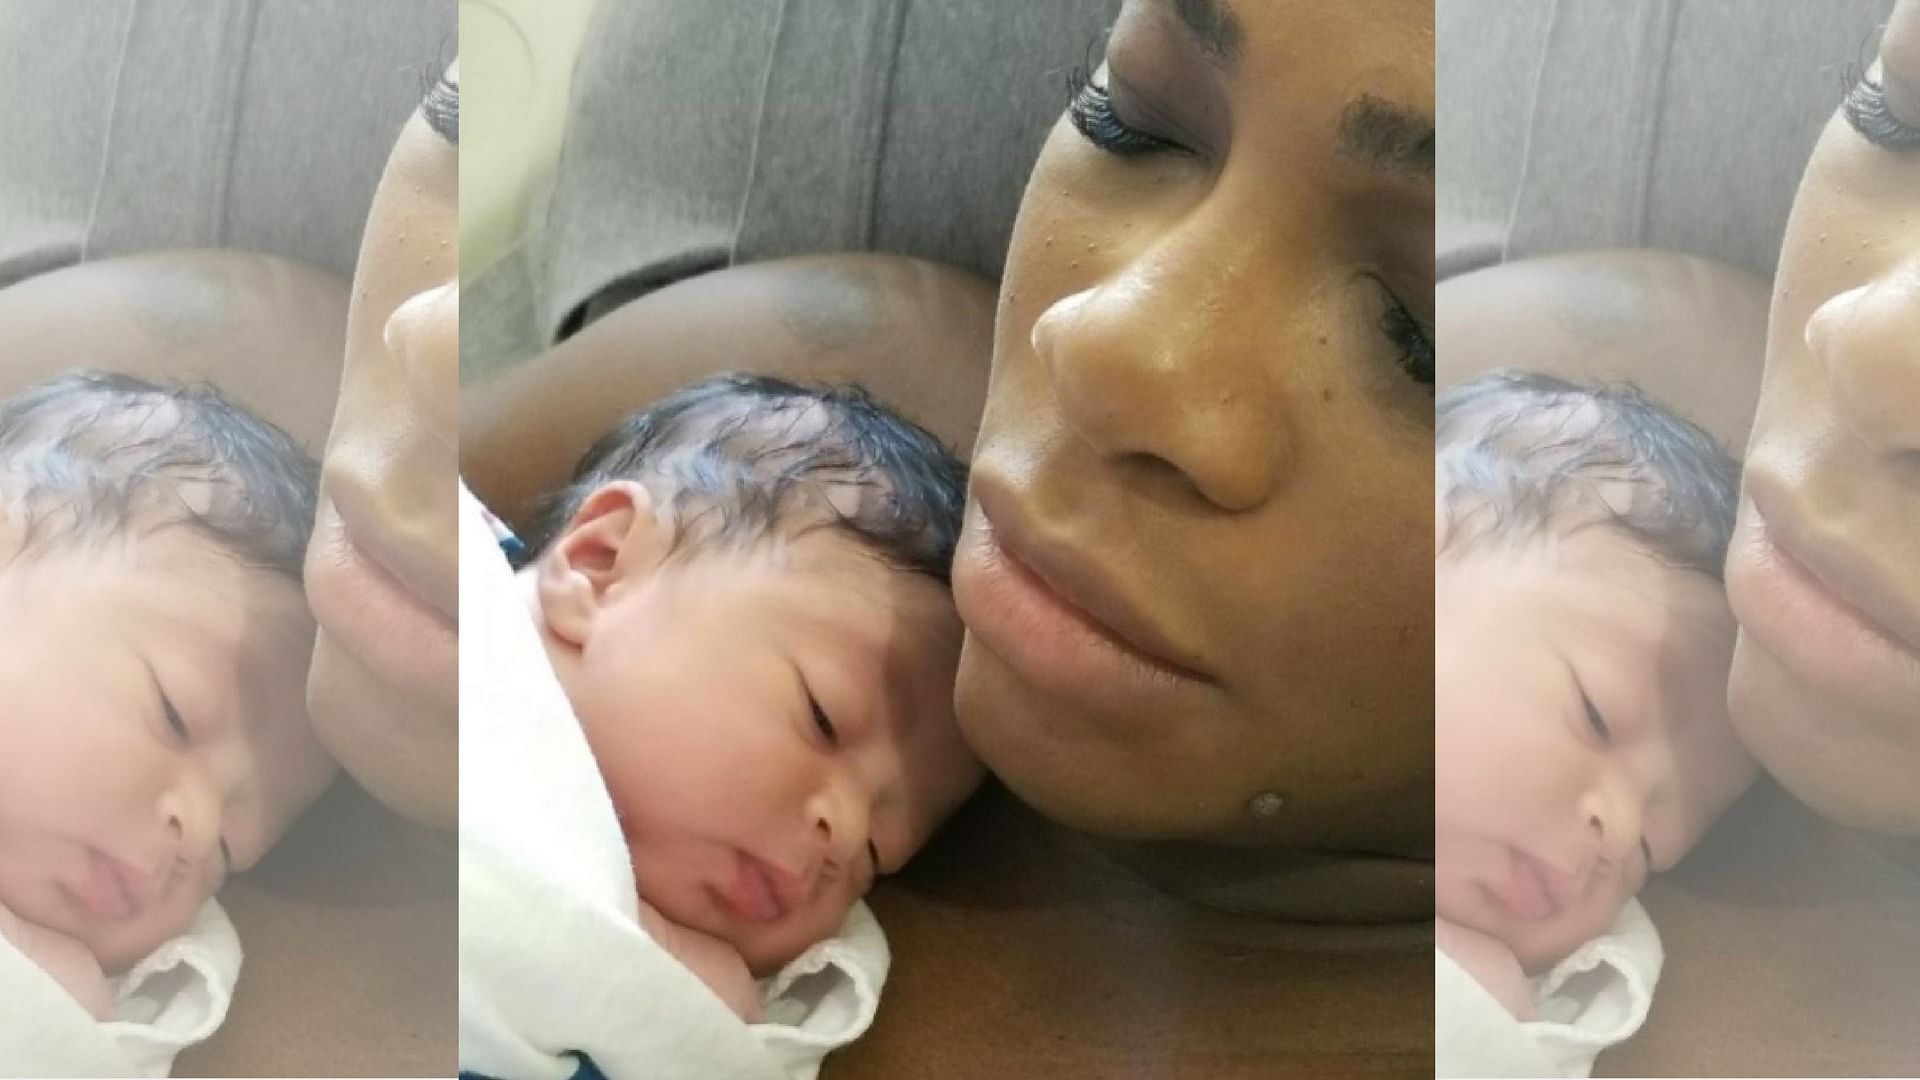 Tennis queen Serena Williams recently revealed that her pregnancy left her bed-ridden for six weeks after child birth.